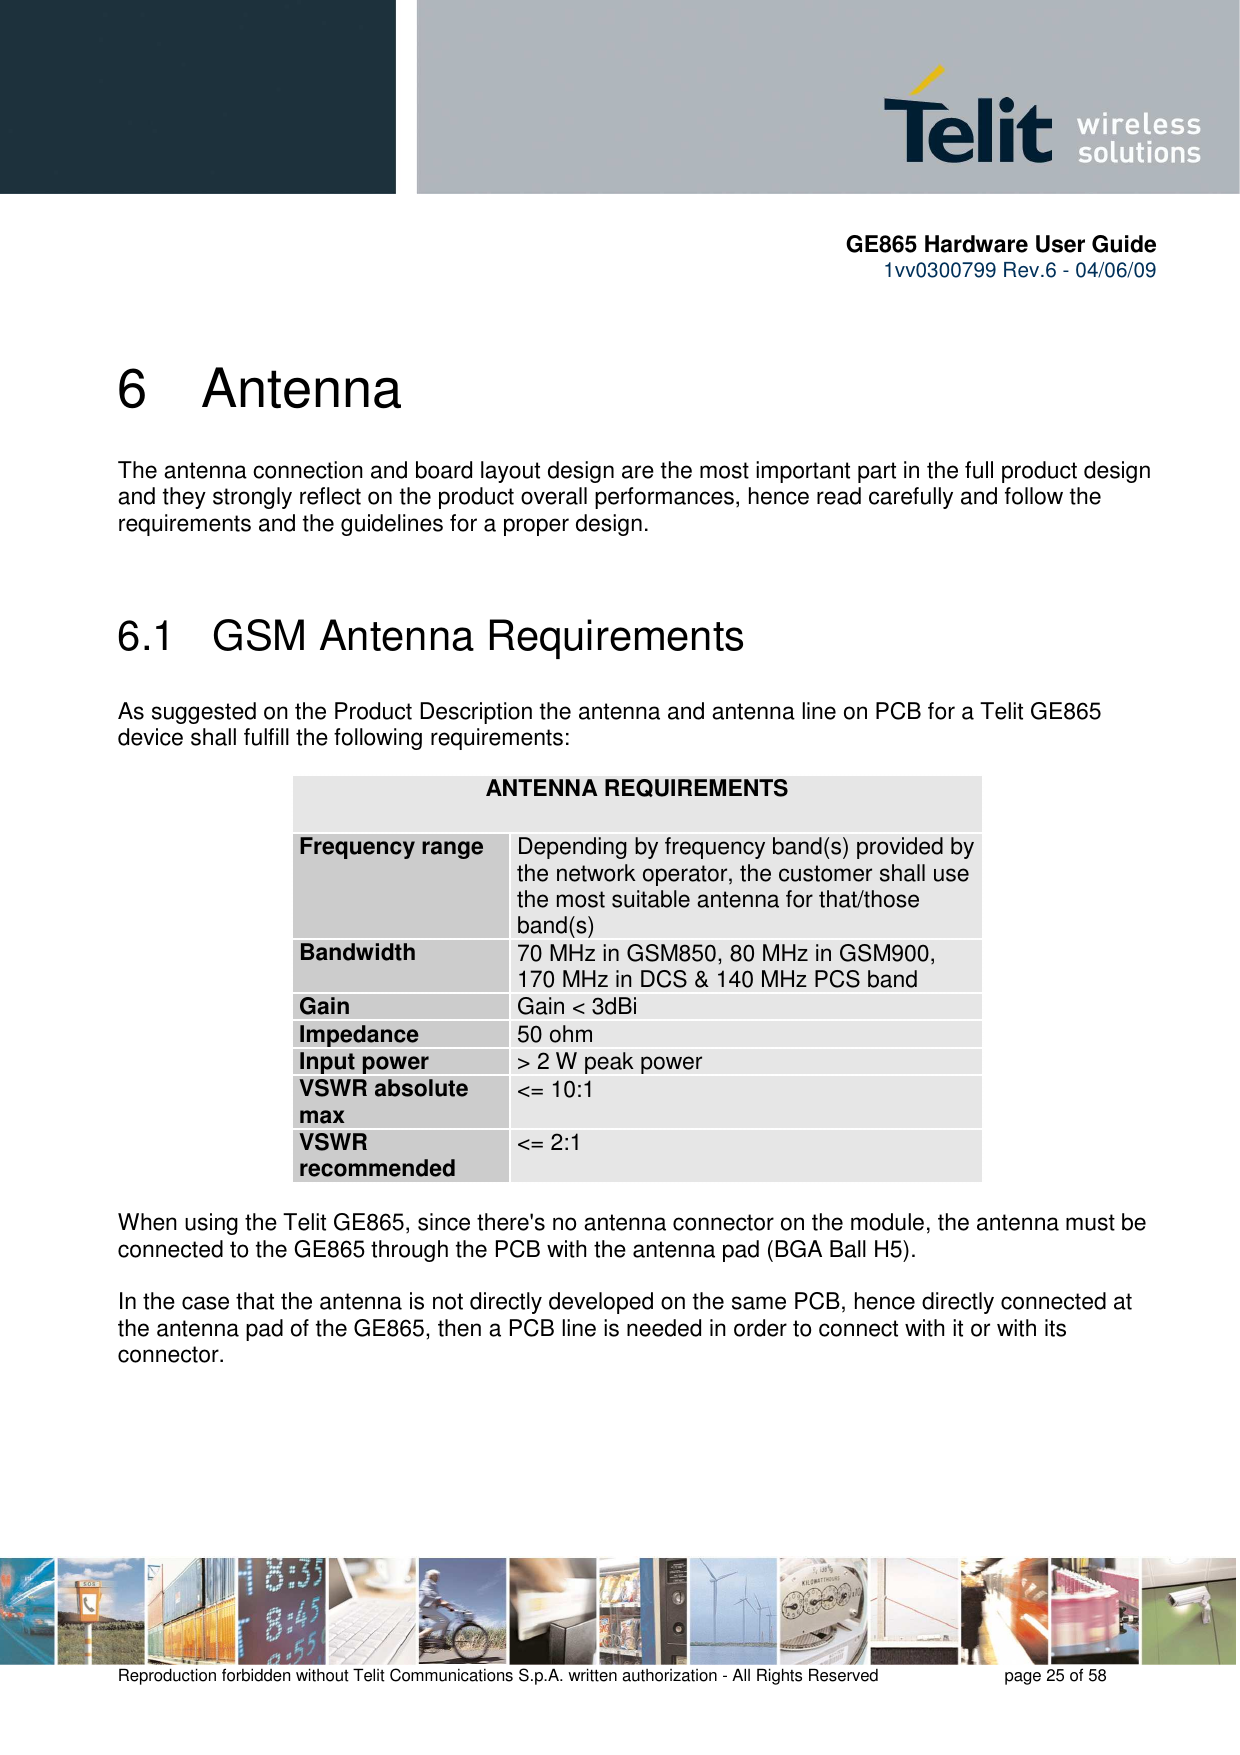       GE865 Hardware User Guide 1vv0300799 Rev.6 - 04/06/09      Reproduction forbidden without Telit Communications S.p.A. written authorization - All Rights Reserved    page 25 of 58  6  Antenna The antenna connection and board layout design are the most important part in the full product design and they strongly reflect on the product overall performances, hence read carefully and follow the requirements and the guidelines for a proper design.  6.1   GSM Antenna Requirements As suggested on the Product Description the antenna and antenna line on PCB for a Telit GE865 device shall fulfill the following requirements:   ANTENNA REQUIREMENTS Frequency range Depending by frequency band(s) provided by the network operator, the customer shall use the most suitable antenna for that/those band(s) Bandwidth 70 MHz in GSM850, 80 MHz in GSM900, 170 MHz in DCS &amp; 140 MHz PCS band Gain Gain &lt; 3dBi Impedance 50 ohm Input power &gt; 2 W peak power VSWR absolute max  &lt;= 10:1 VSWR recommended  &lt;= 2:1  When using the Telit GE865, since there&apos;s no antenna connector on the module, the antenna must be connected to the GE865 through the PCB with the antenna pad (BGA Ball H5).  In the case that the antenna is not directly developed on the same PCB, hence directly connected at the antenna pad of the GE865, then a PCB line is needed in order to connect with it or with its connector.   